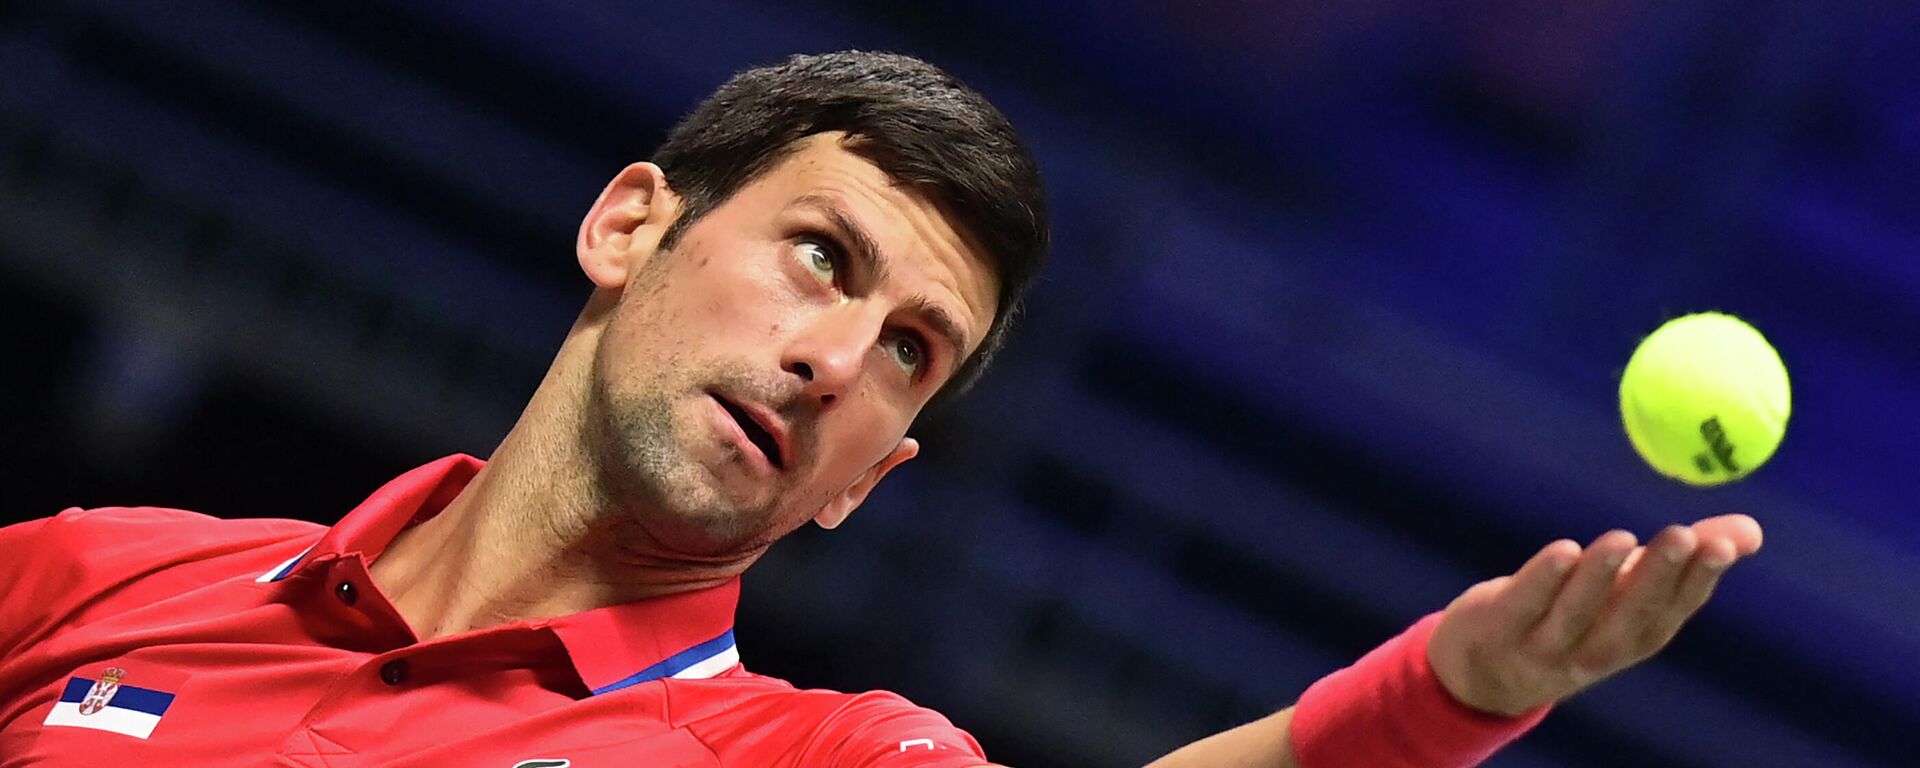 Serbia's Novak Djokovic serves the ball to Germany's Jan-Lennard Struff (not pictured) during the men's singles group stage match between Serbia and Germany of the Davis Cup tennis tournament in Innsbruck, Austria, on November 27, 2021 - Sputnik International, 1920, 16.01.2022